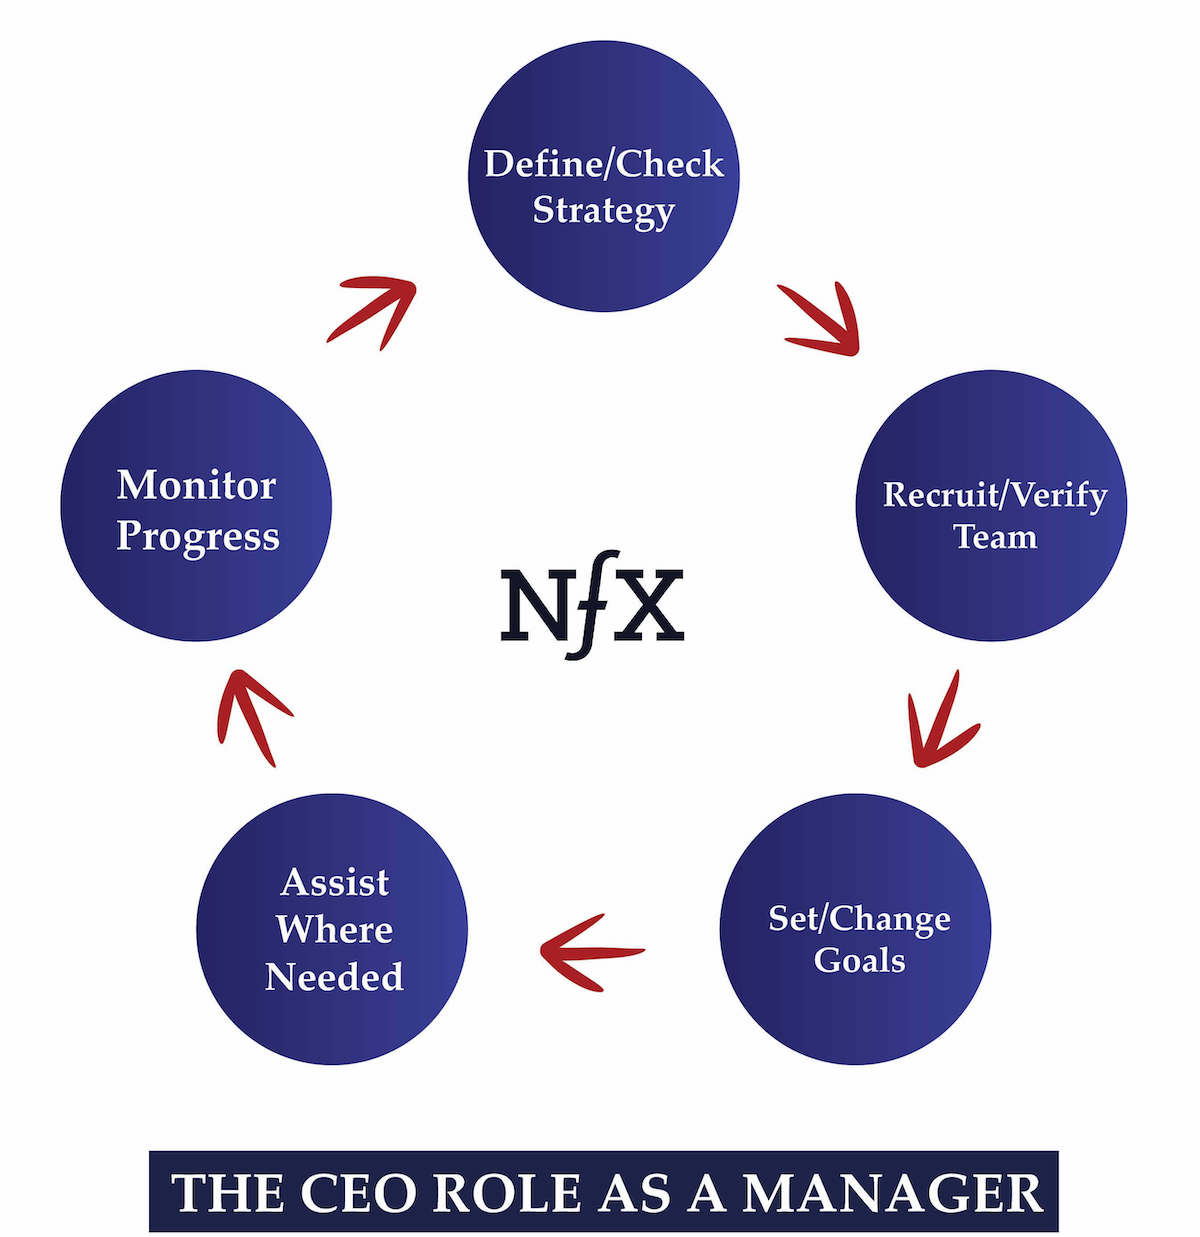 The CEO Role as a Manager